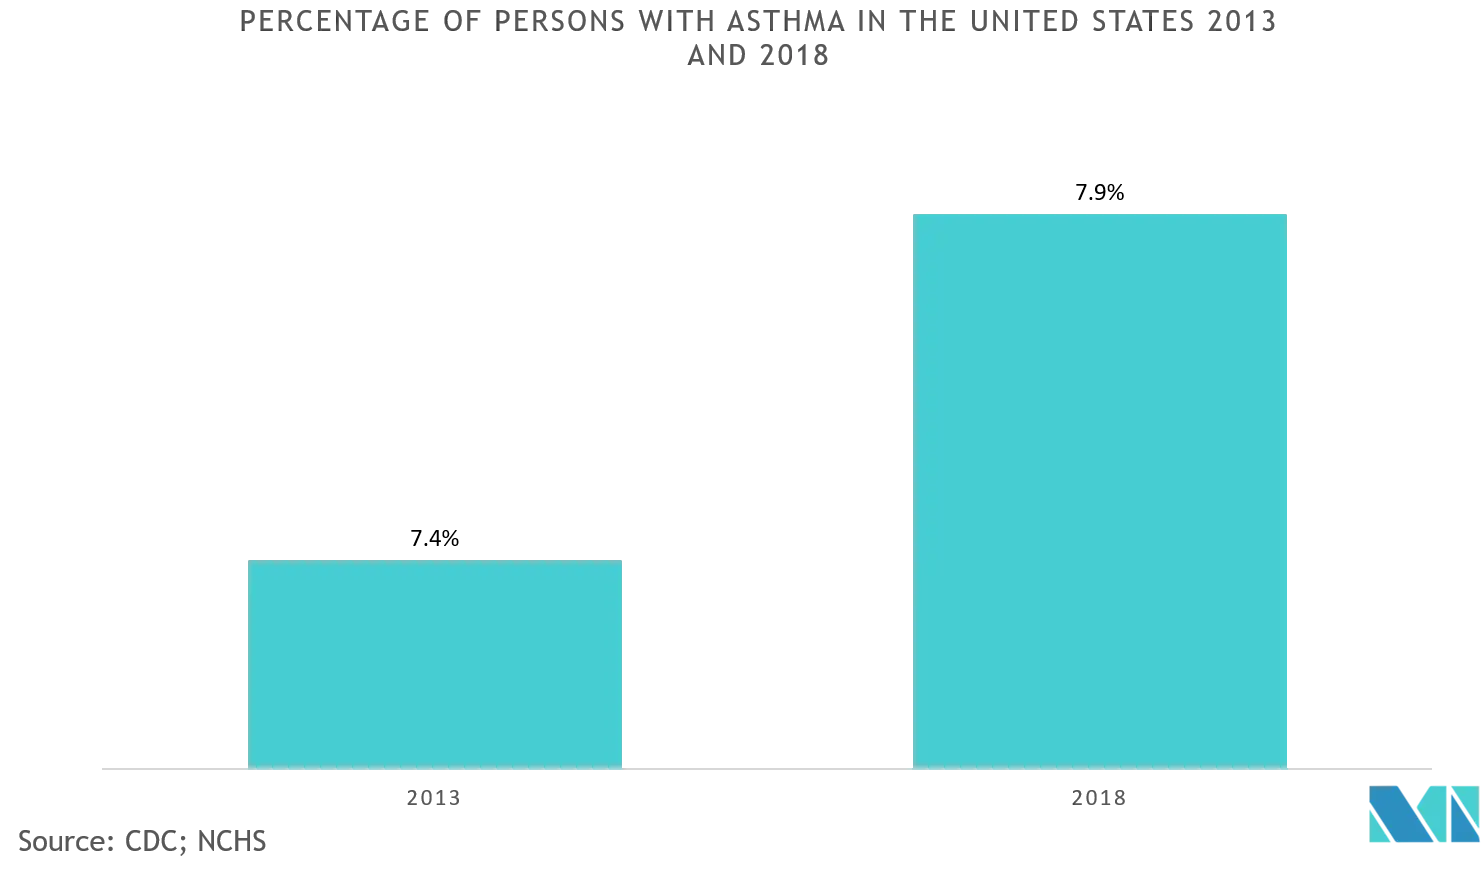 asthma devices market share